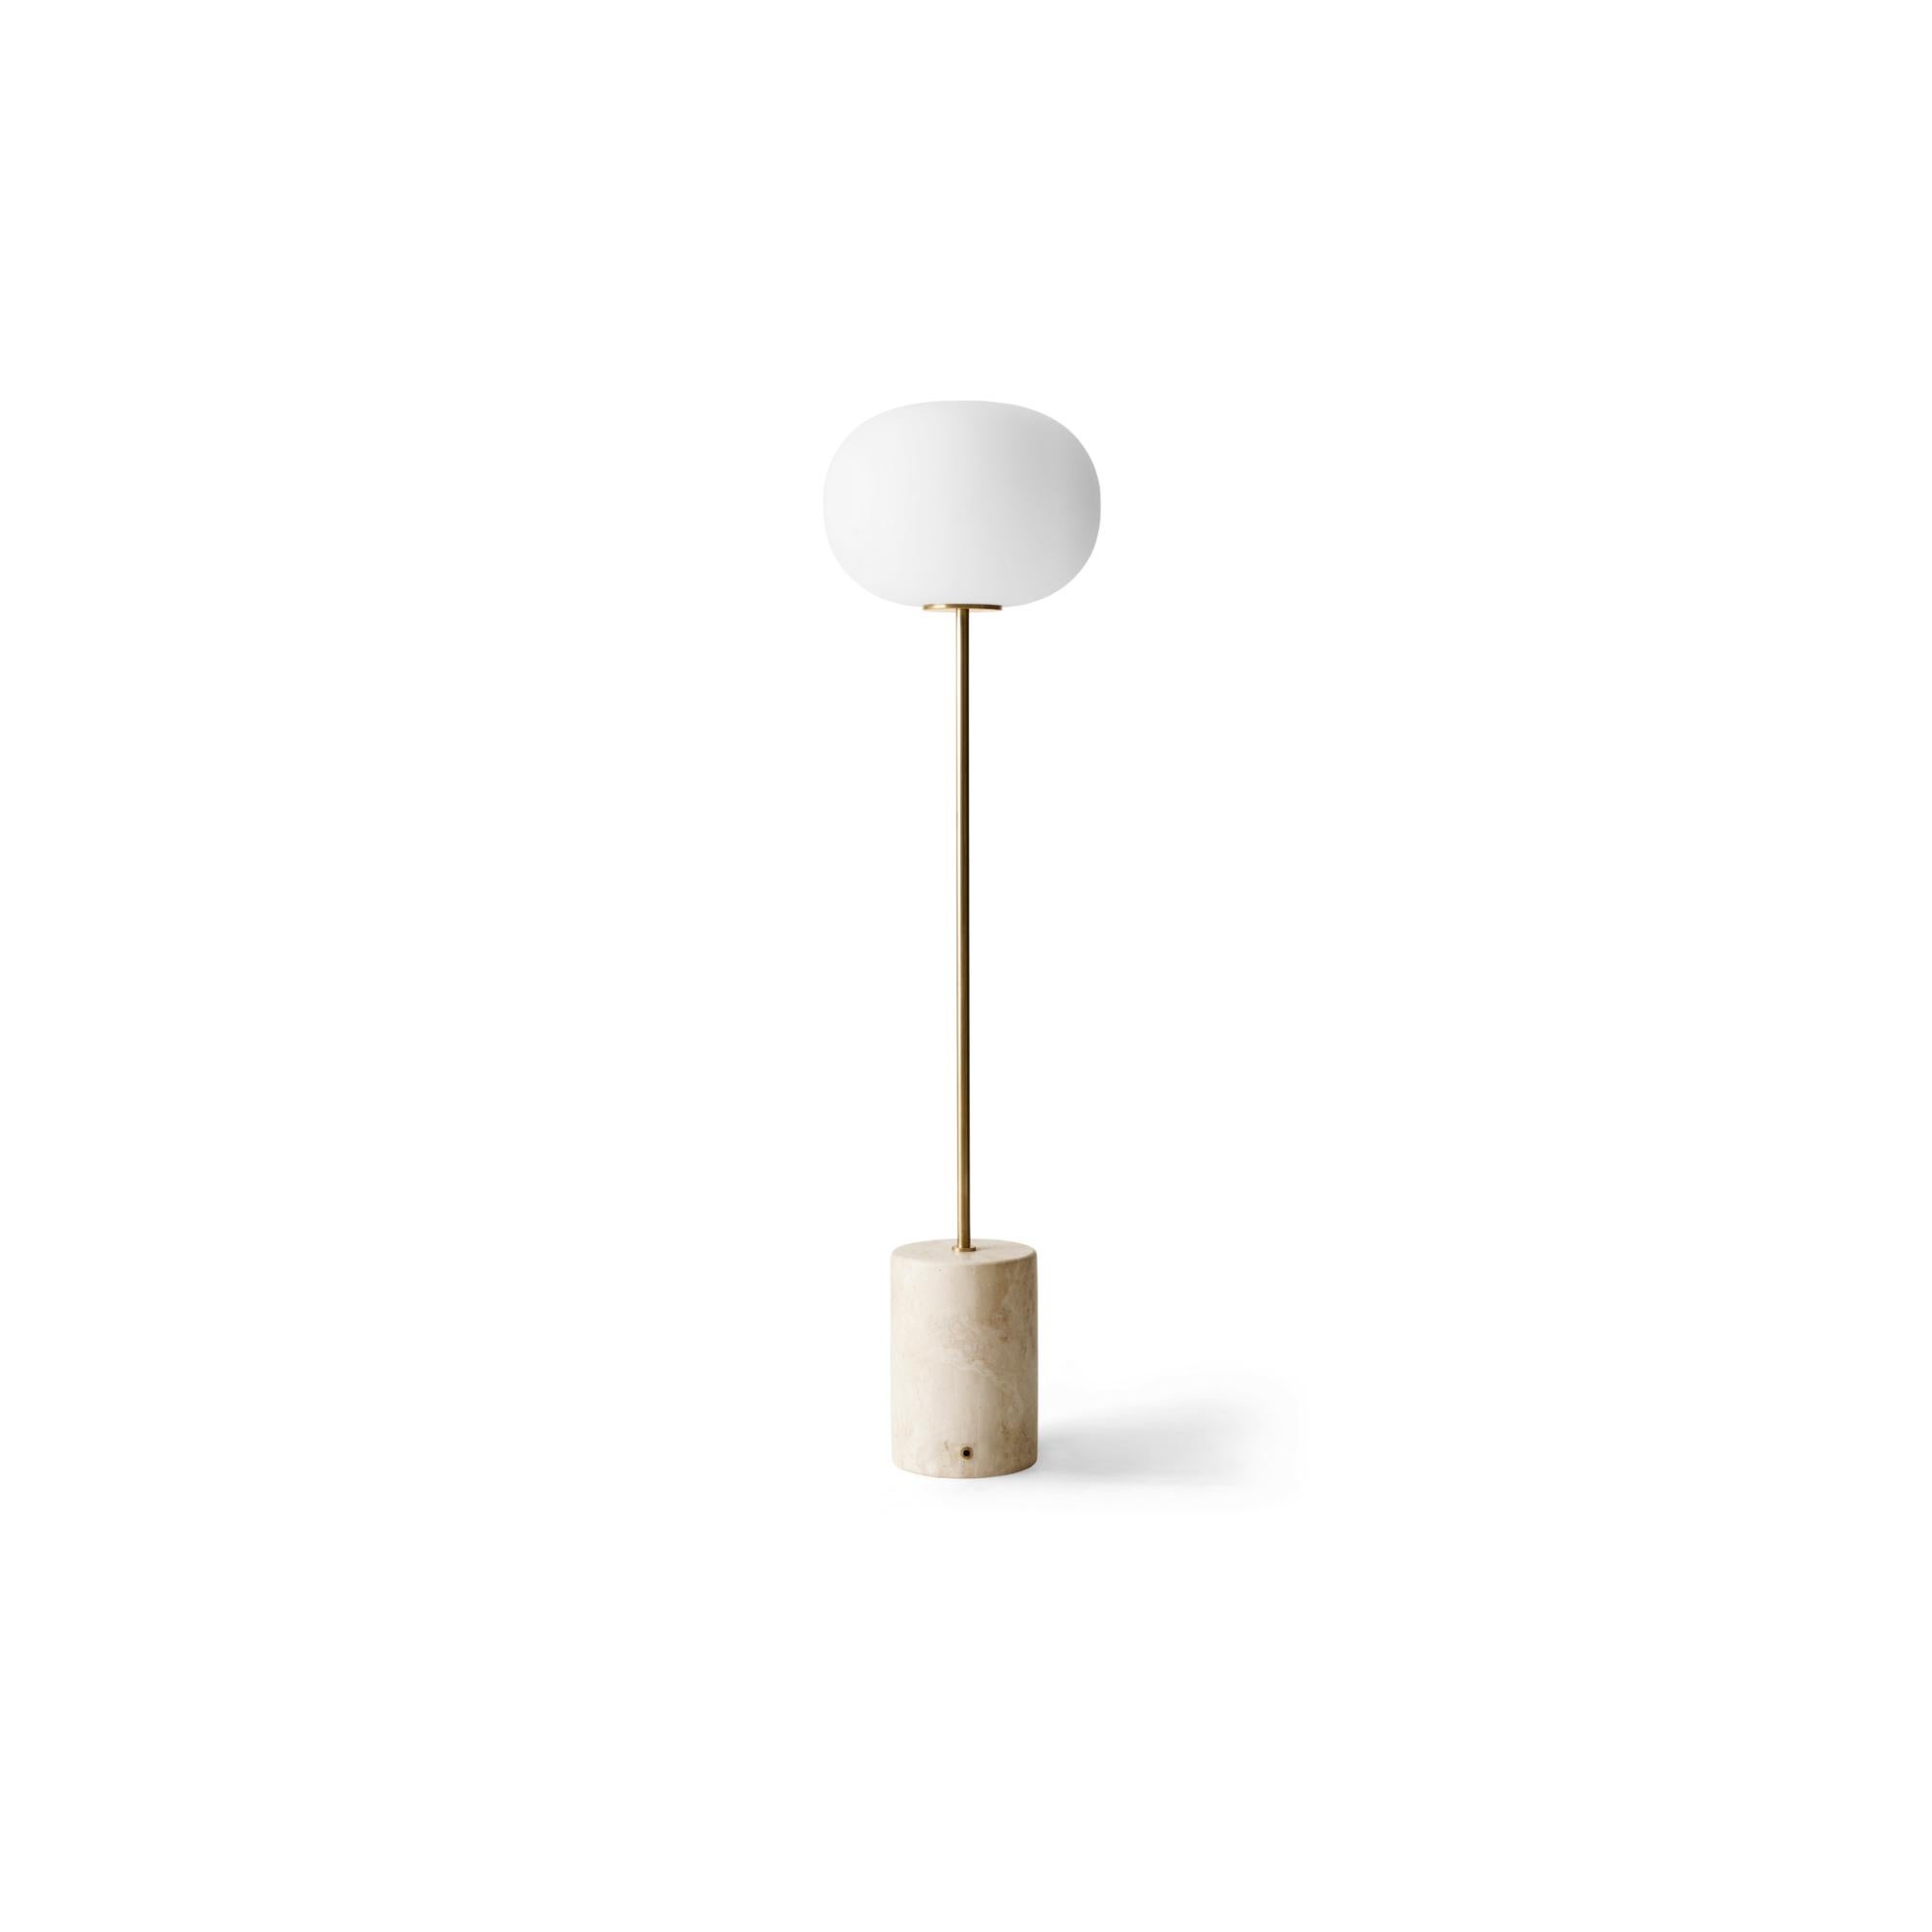 The JWDA floor lamp is part of a collection of lighting inspired by traditional oil lamps. Crafted from contrasting materials, the elegant yet bold design is a lesson in refinement and a study in geometry. An elliptical opal glass shade, a slender